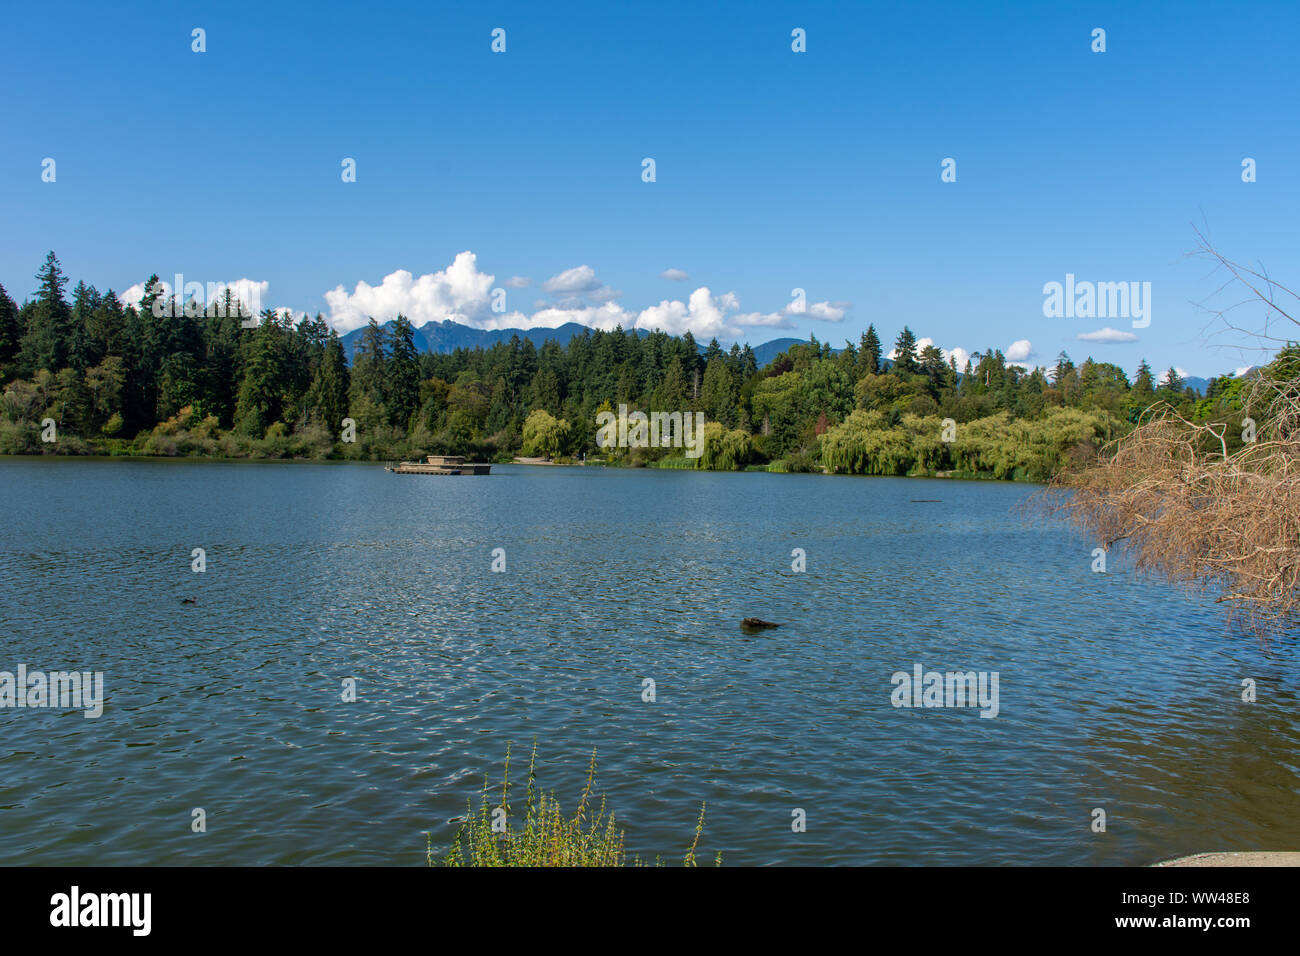 Lost Lagoon in Stanley Park in Vancouver, British Columbia, Canada looking towards the north shore mountains in beautiful summer nature. Stock Photo